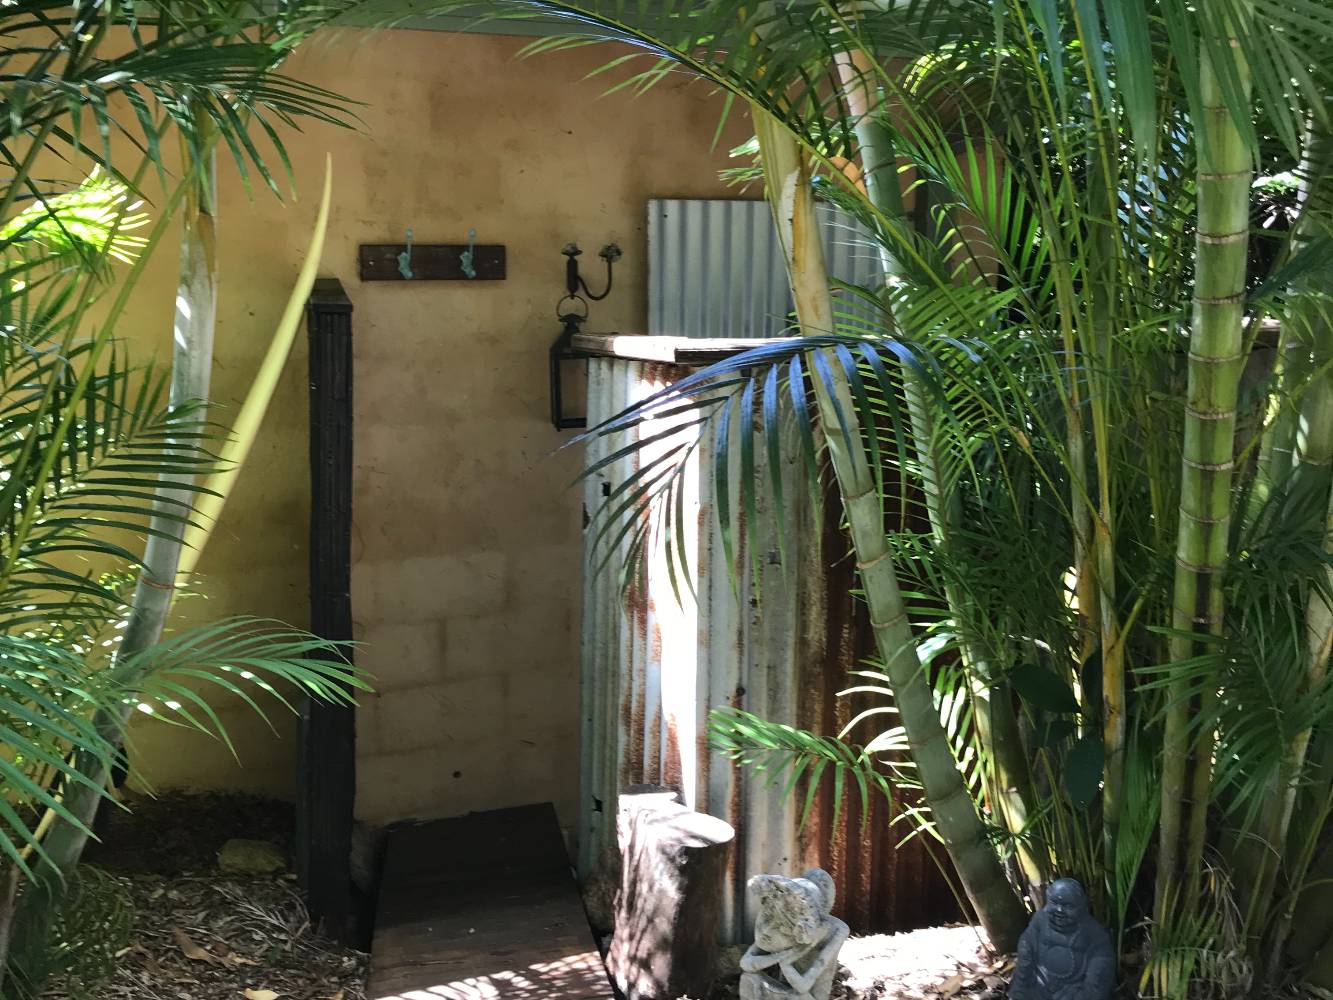 Balinese style outdoor shower with hot/cold water